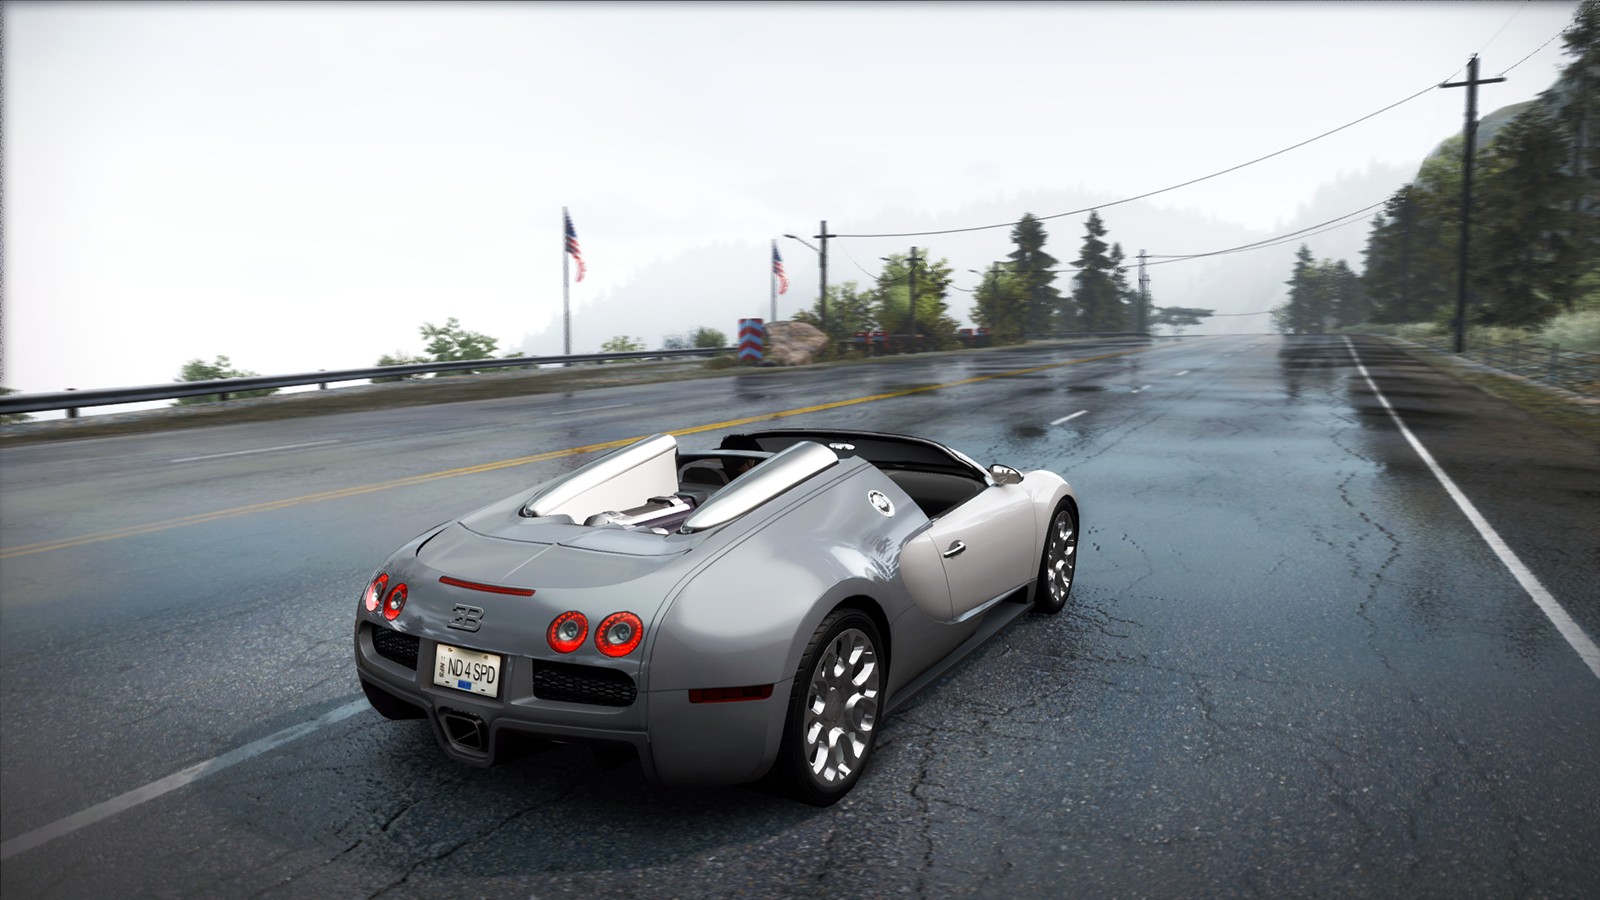 nfs11_2012_06_16_23_29odmd.png